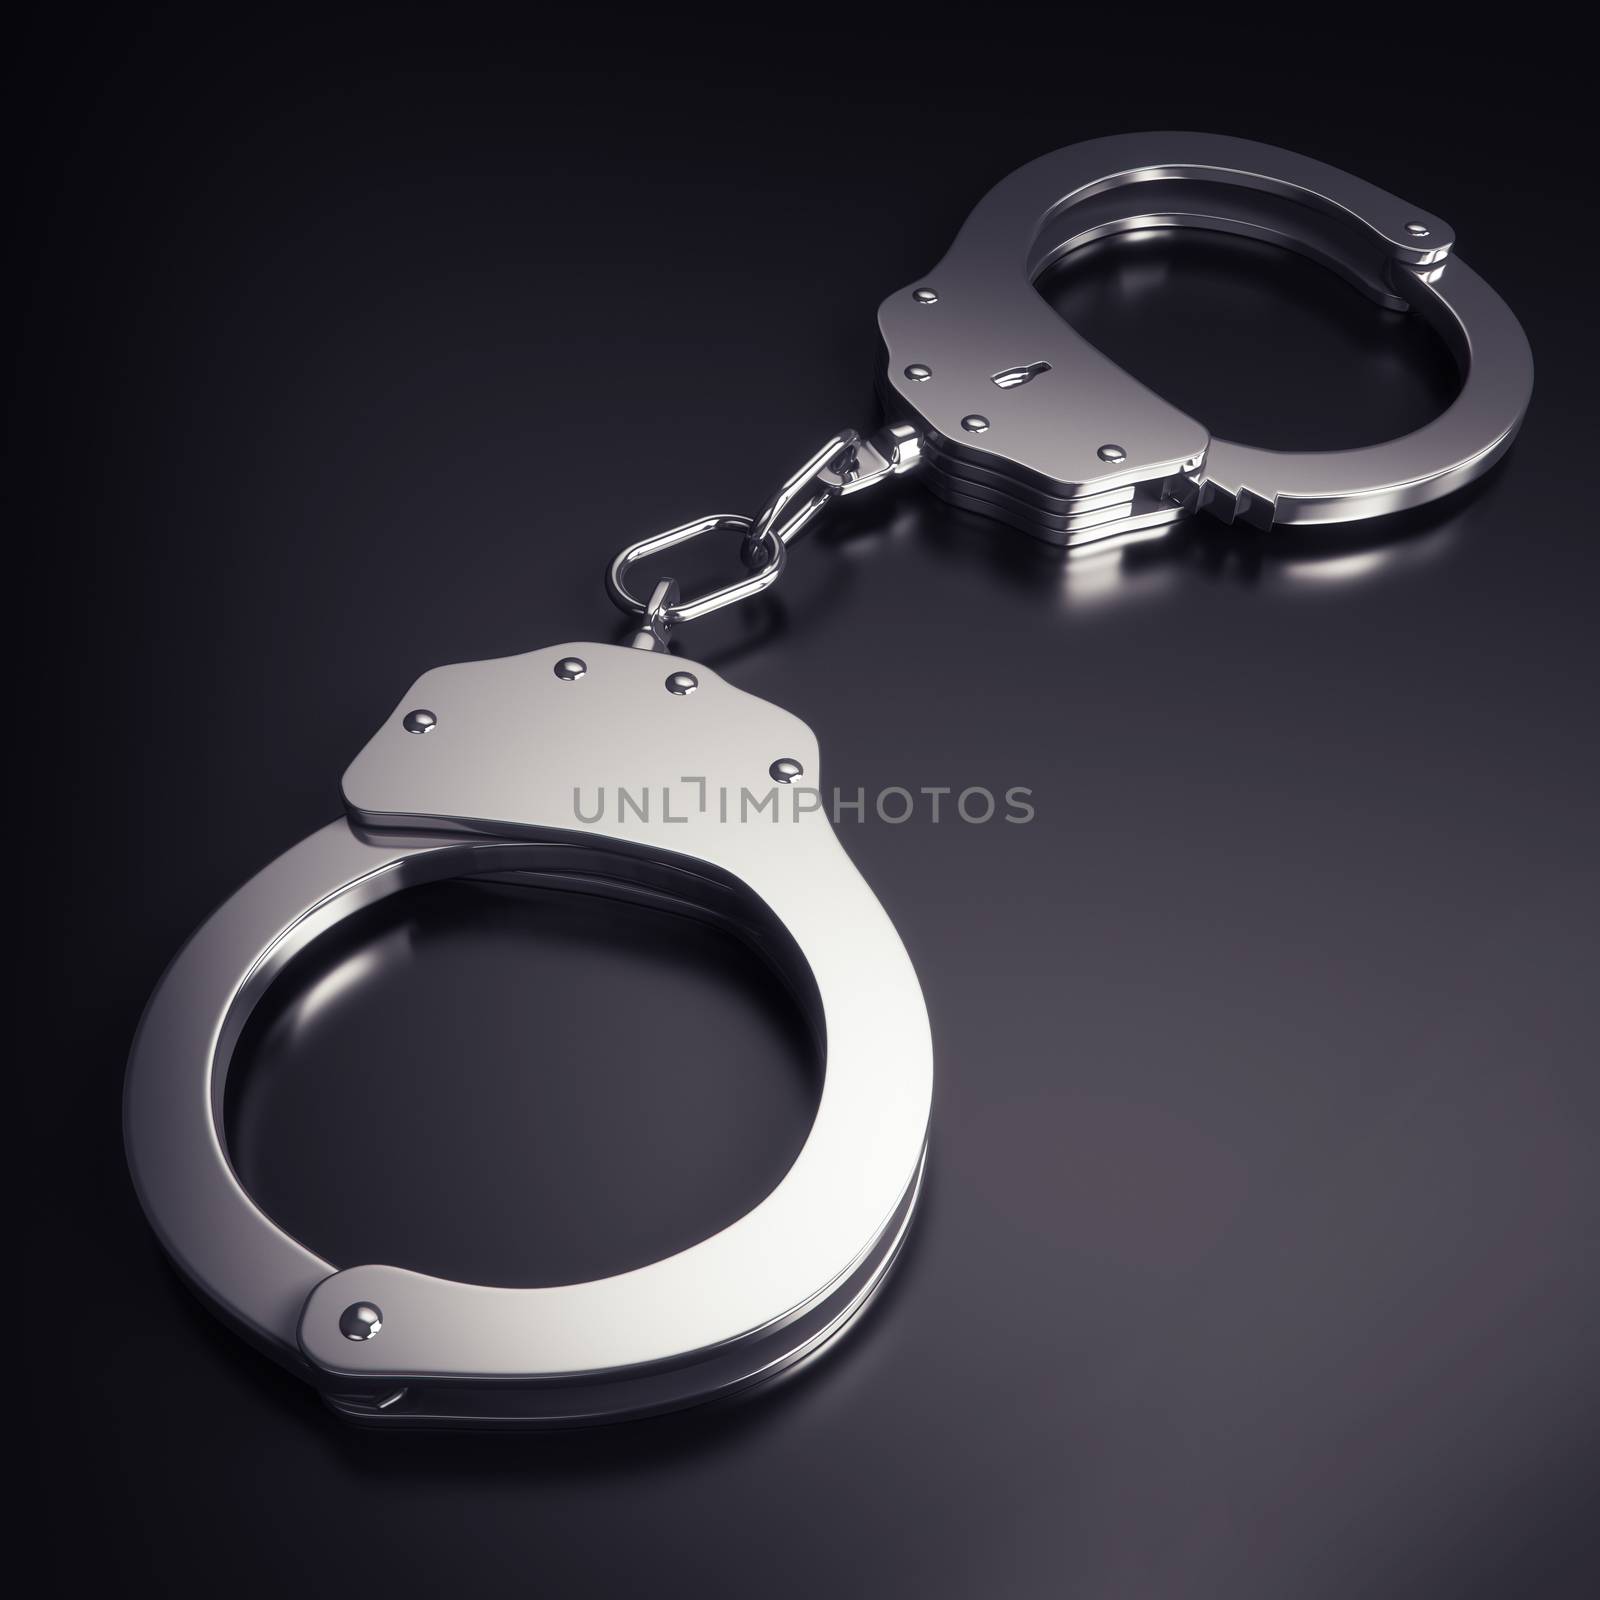 handcuffs with clipping path by 123dartist